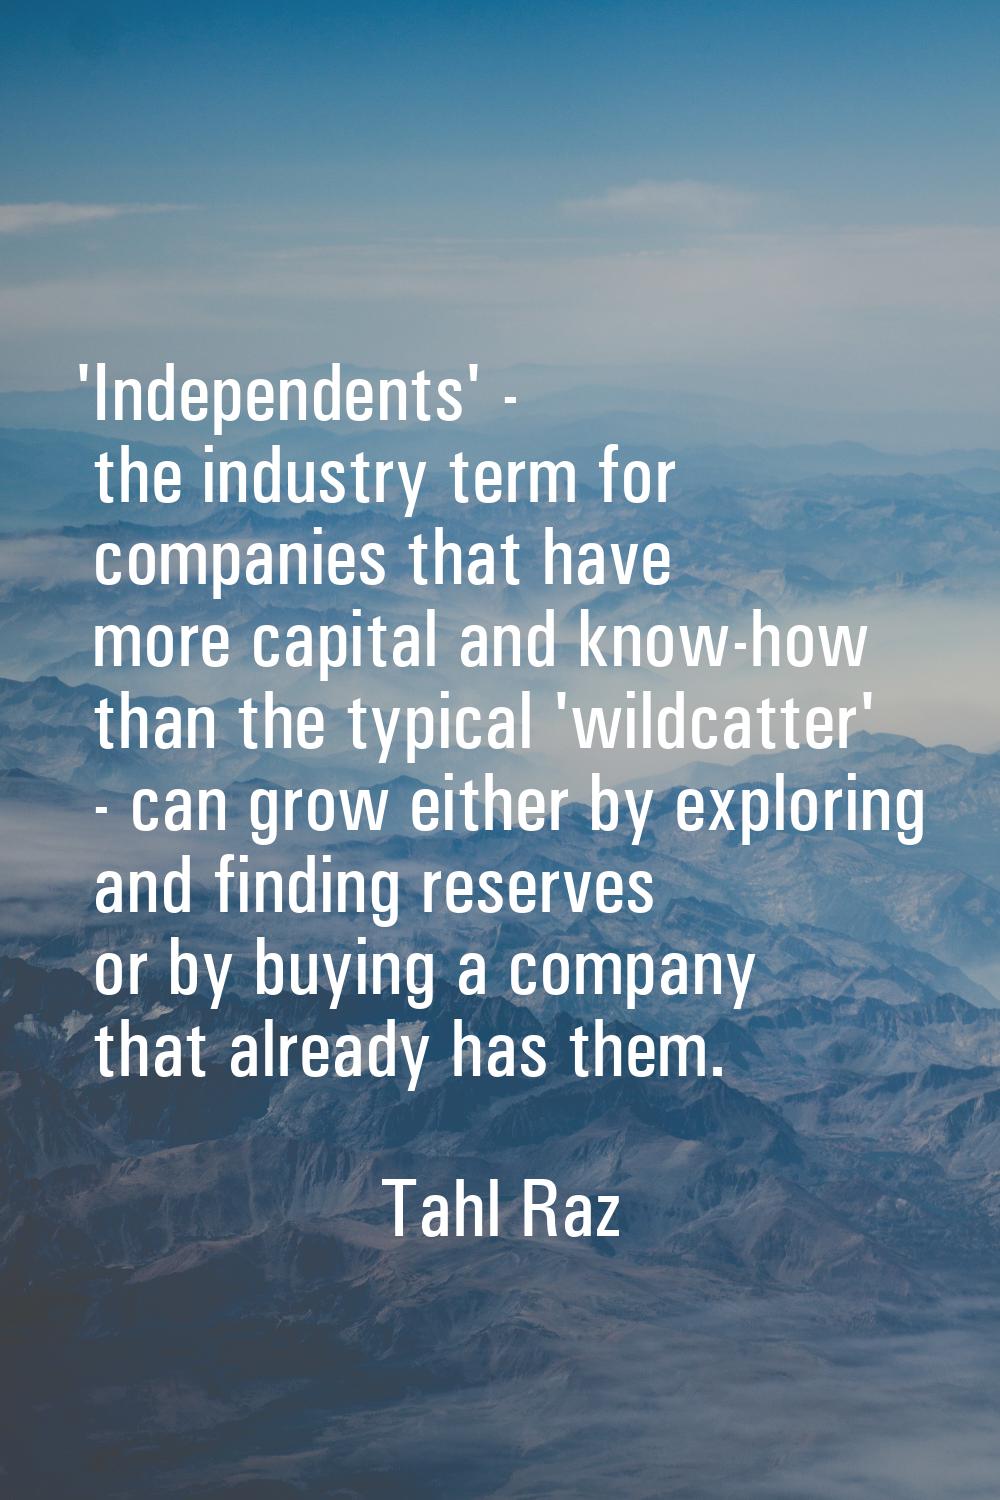 'Independents' - the industry term for companies that have more capital and know-how than the typic